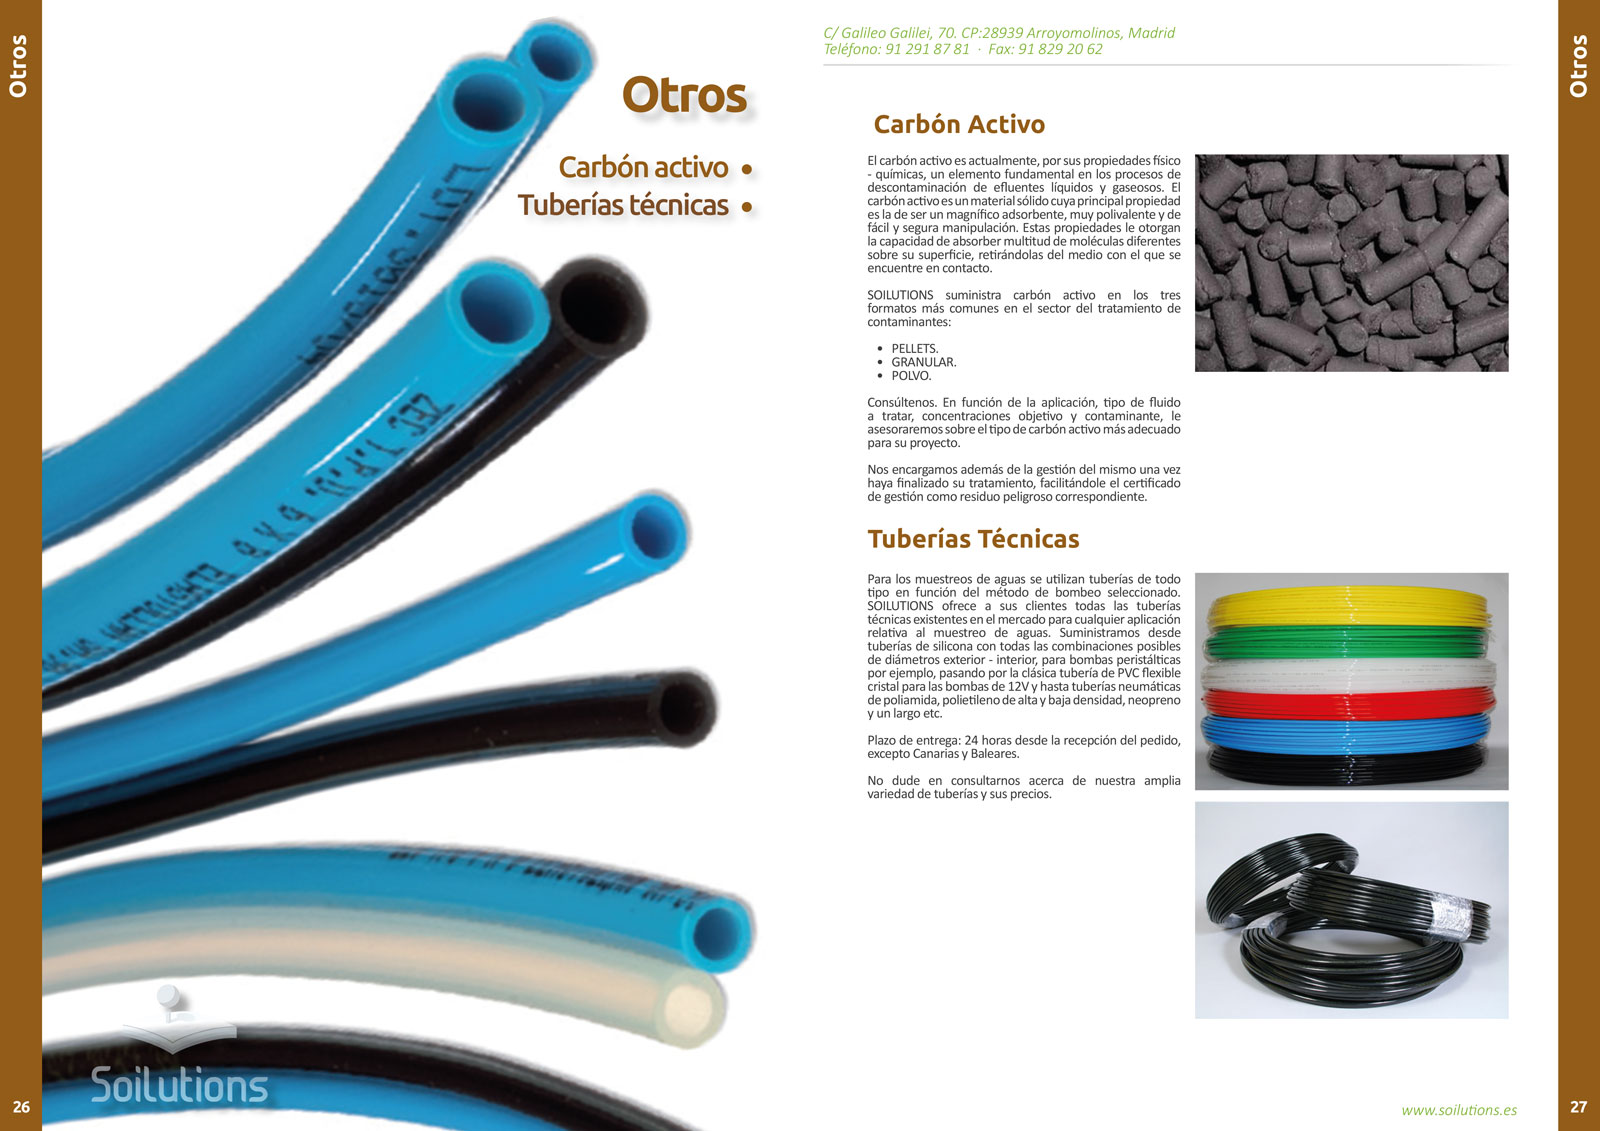 Layout and creative design of corporate catalog of industrial products and services